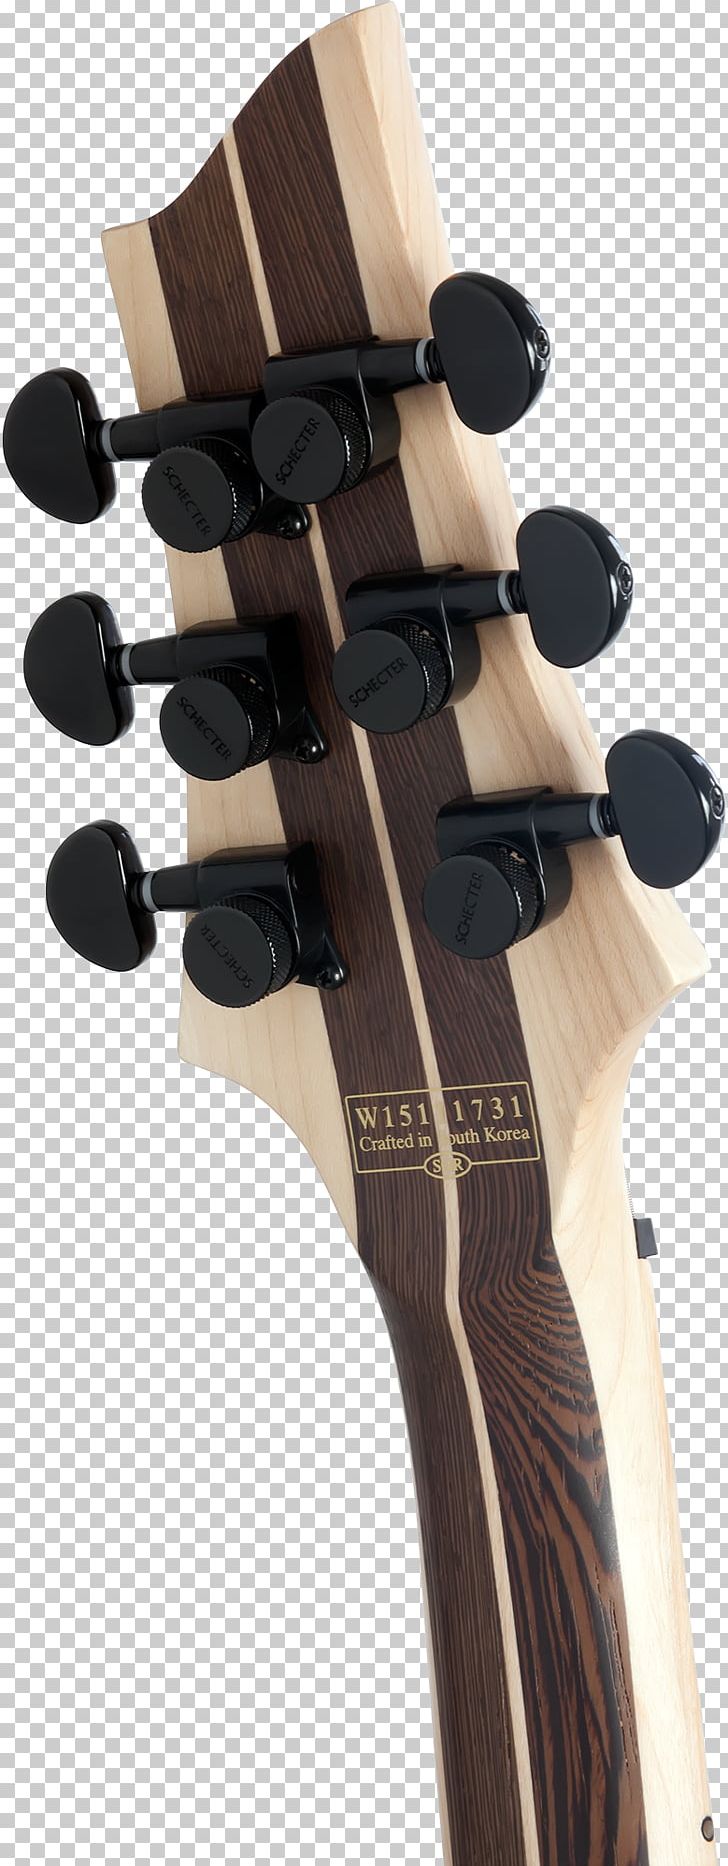 Electric Guitar Acoustic Guitar Schecter Keith Merrow KM-6 MK-II Schecter Guitar Research PNG, Clipart, Acoustic Guitar, Bass Guitar, Electric Guitar, Electricity, Guitar Free PNG Download